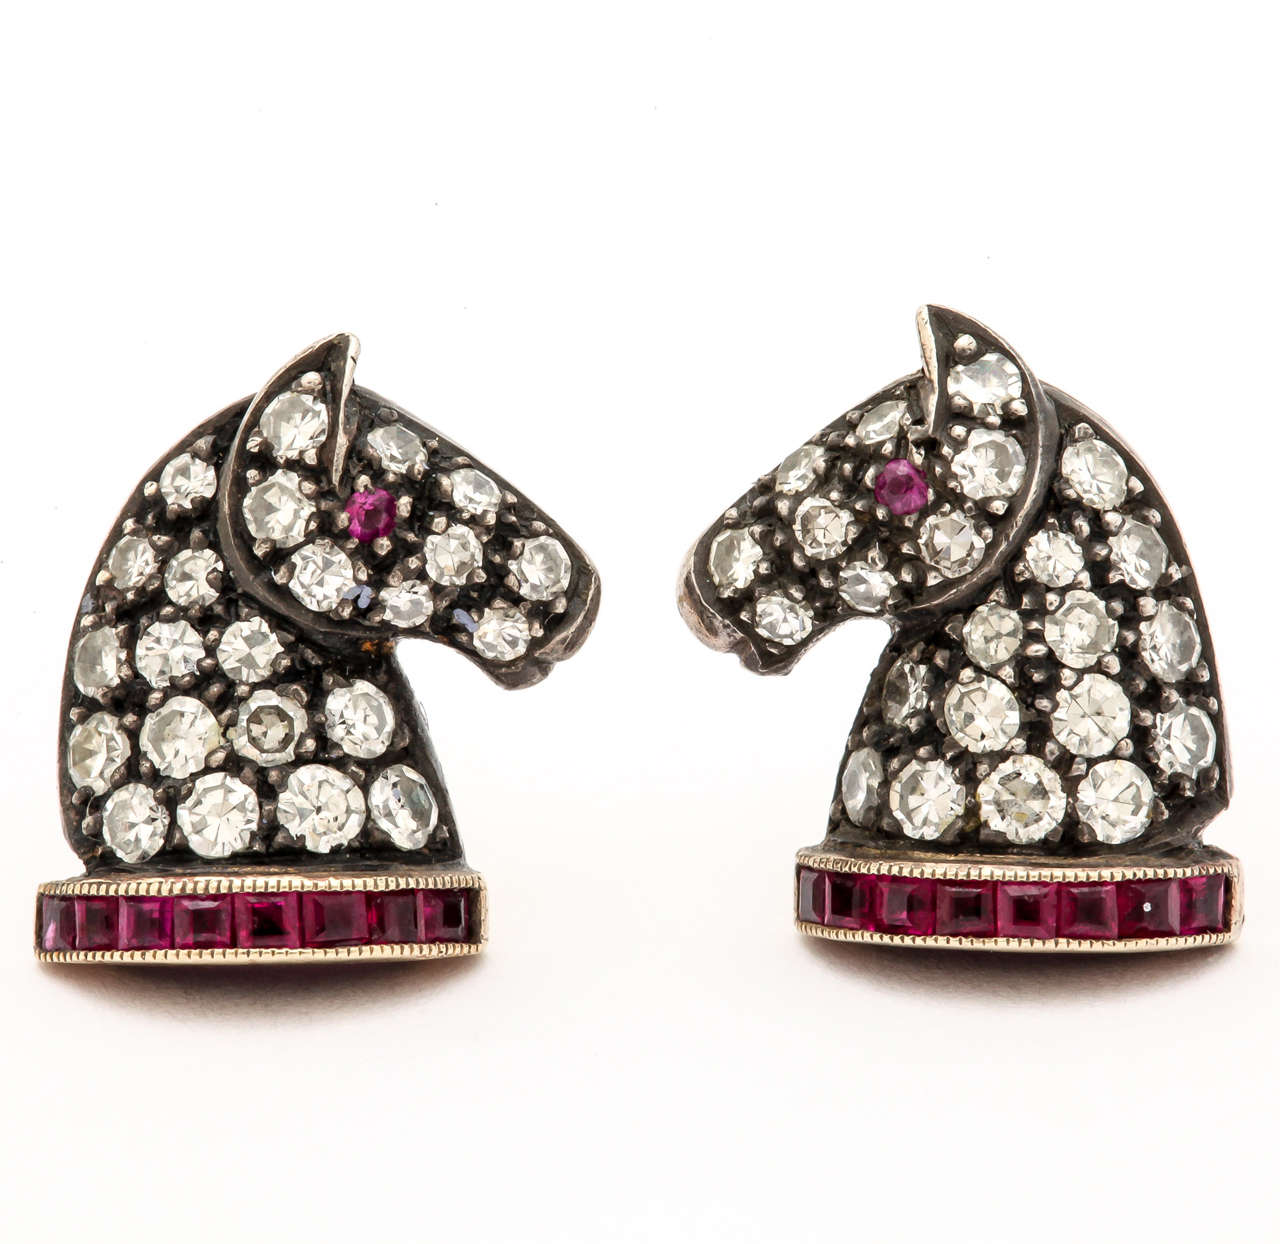 These silver and 18 kt gold horse head earring studs are set with 1 ct white diamonds and .25 ct square cut top quality rubies. These stunning earrings will grace the ears of an elegant equestrian for any occasion, day or night.